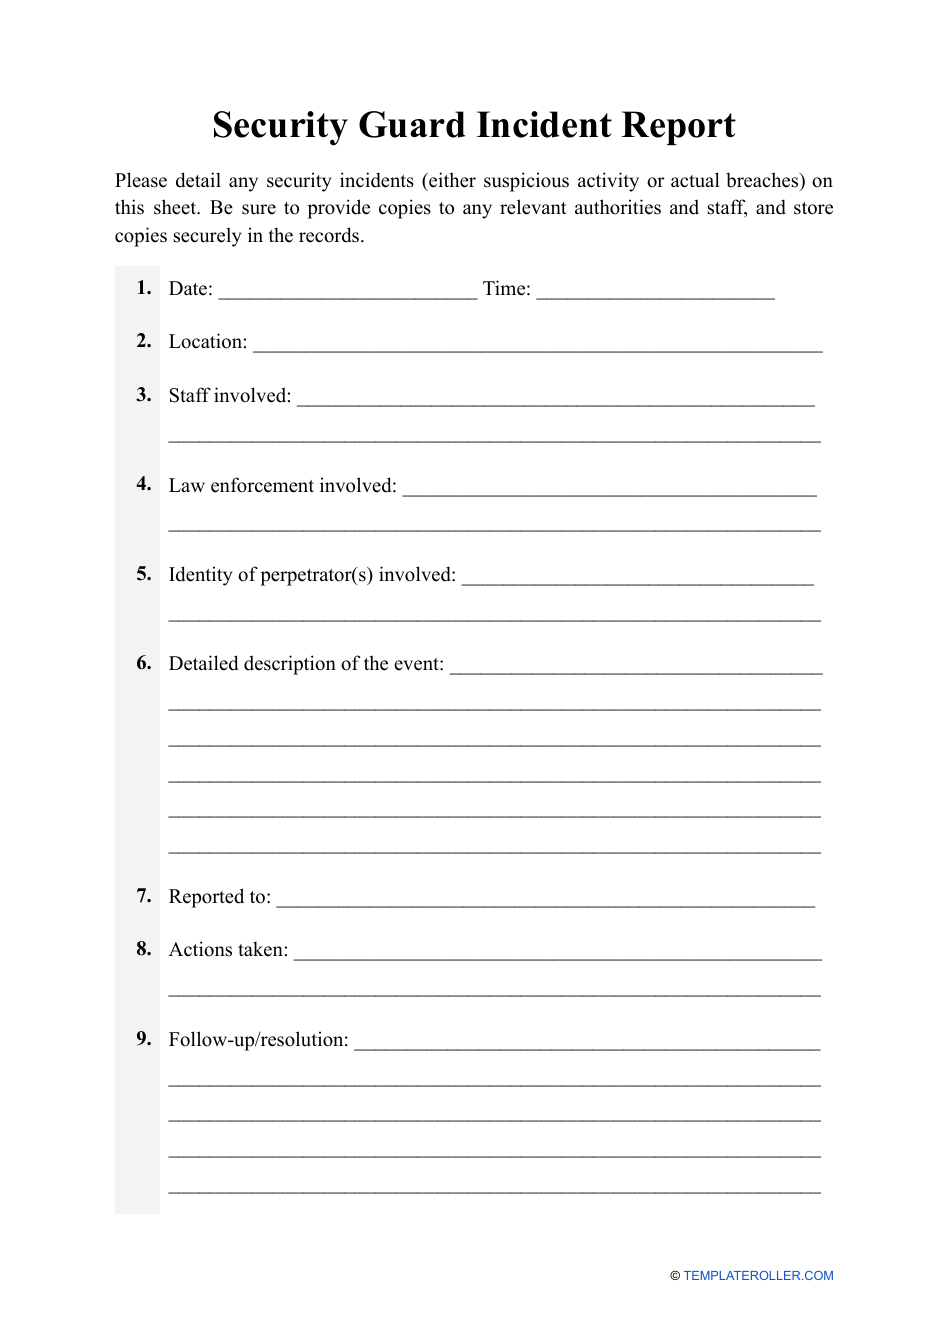 Security Guard Incident Report Template, Page 1